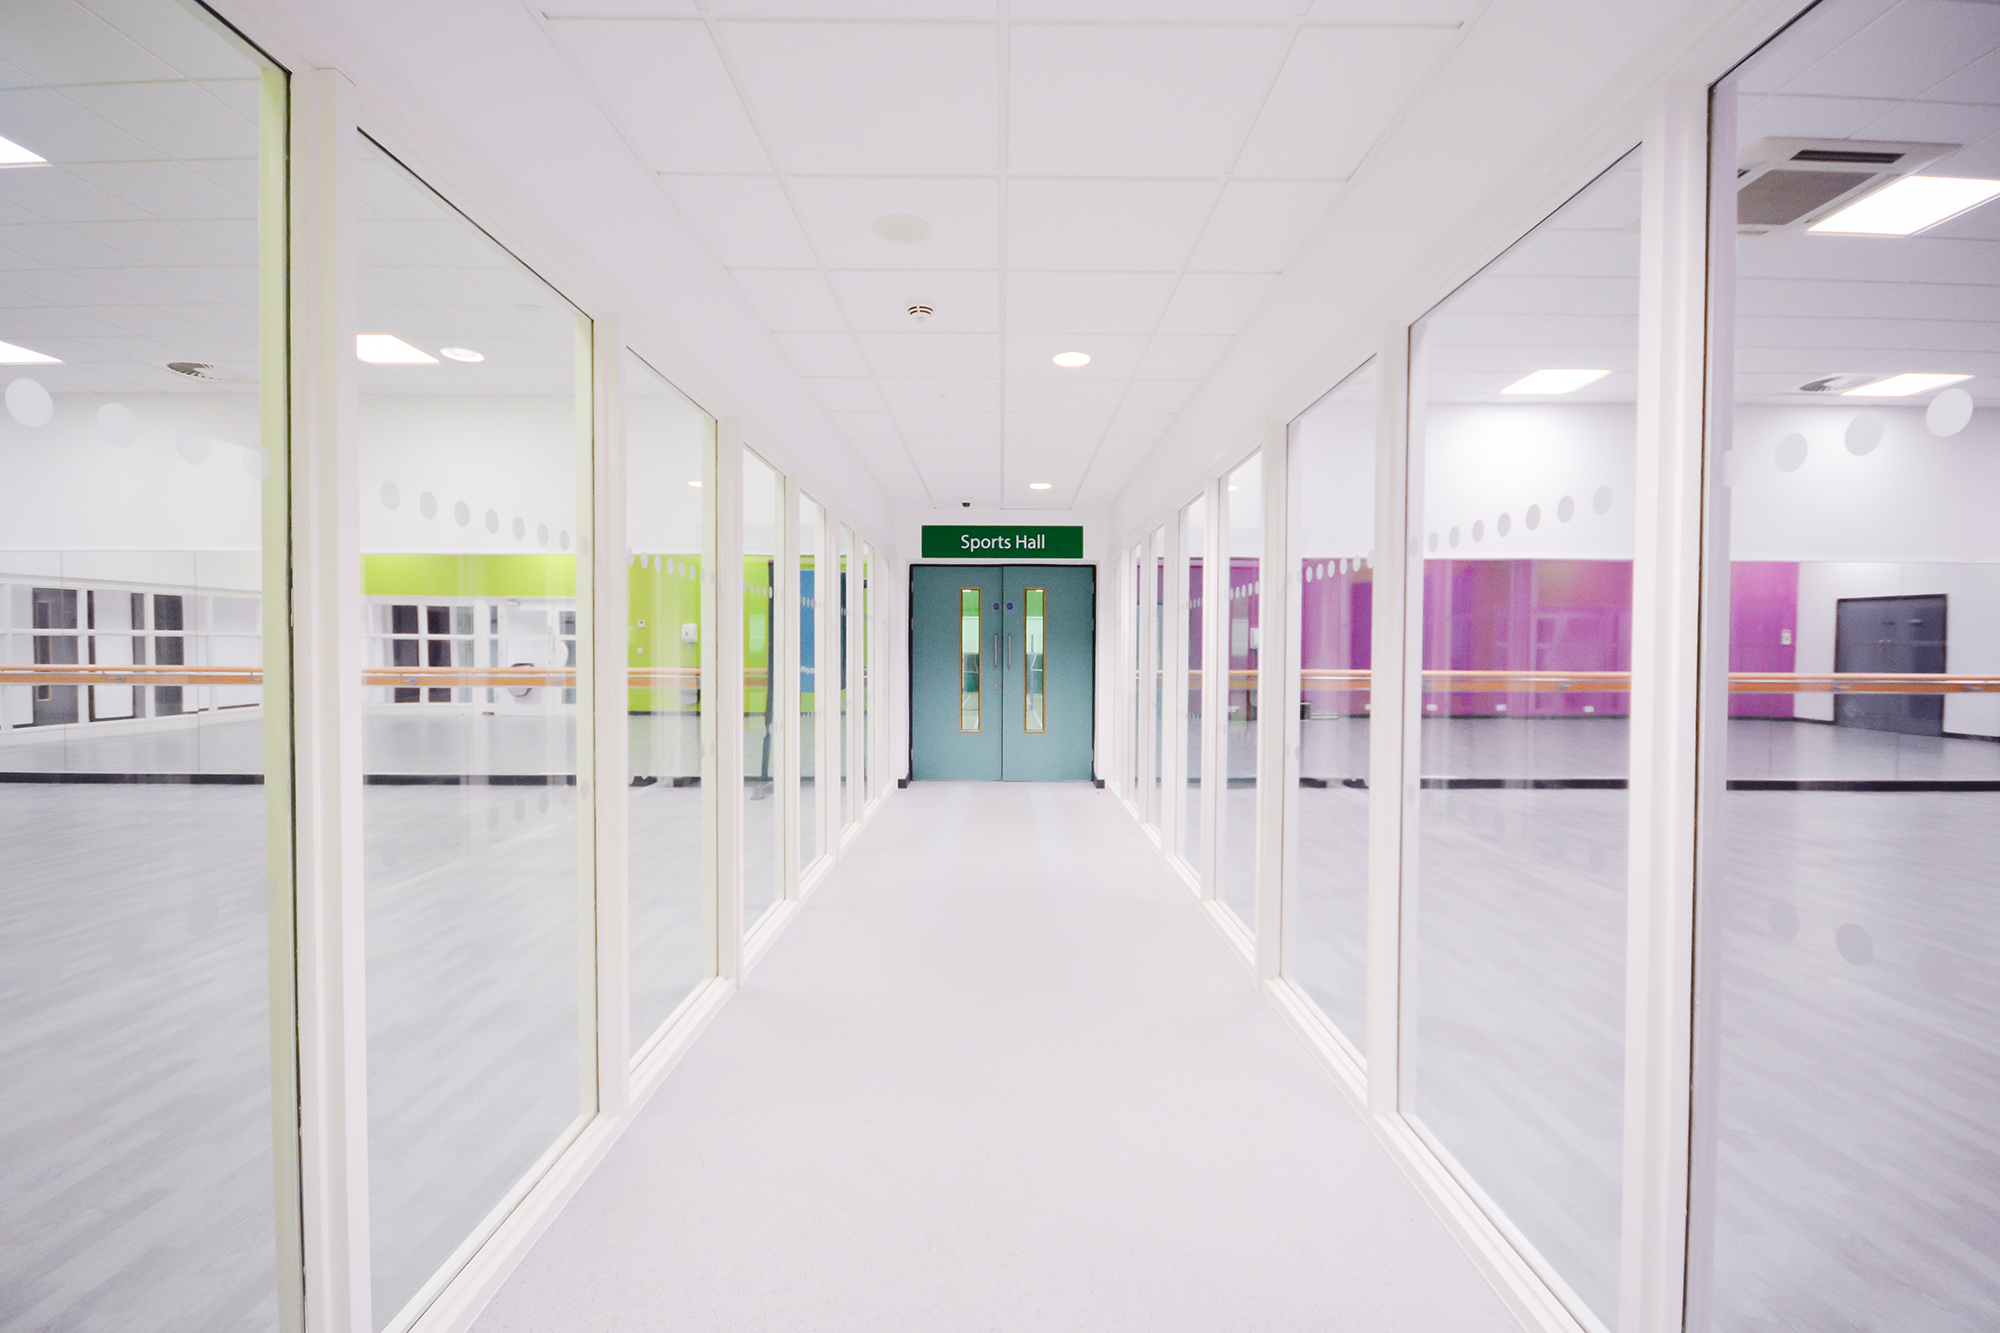 Where Are Fire Doors Required in Commercial Buildings?